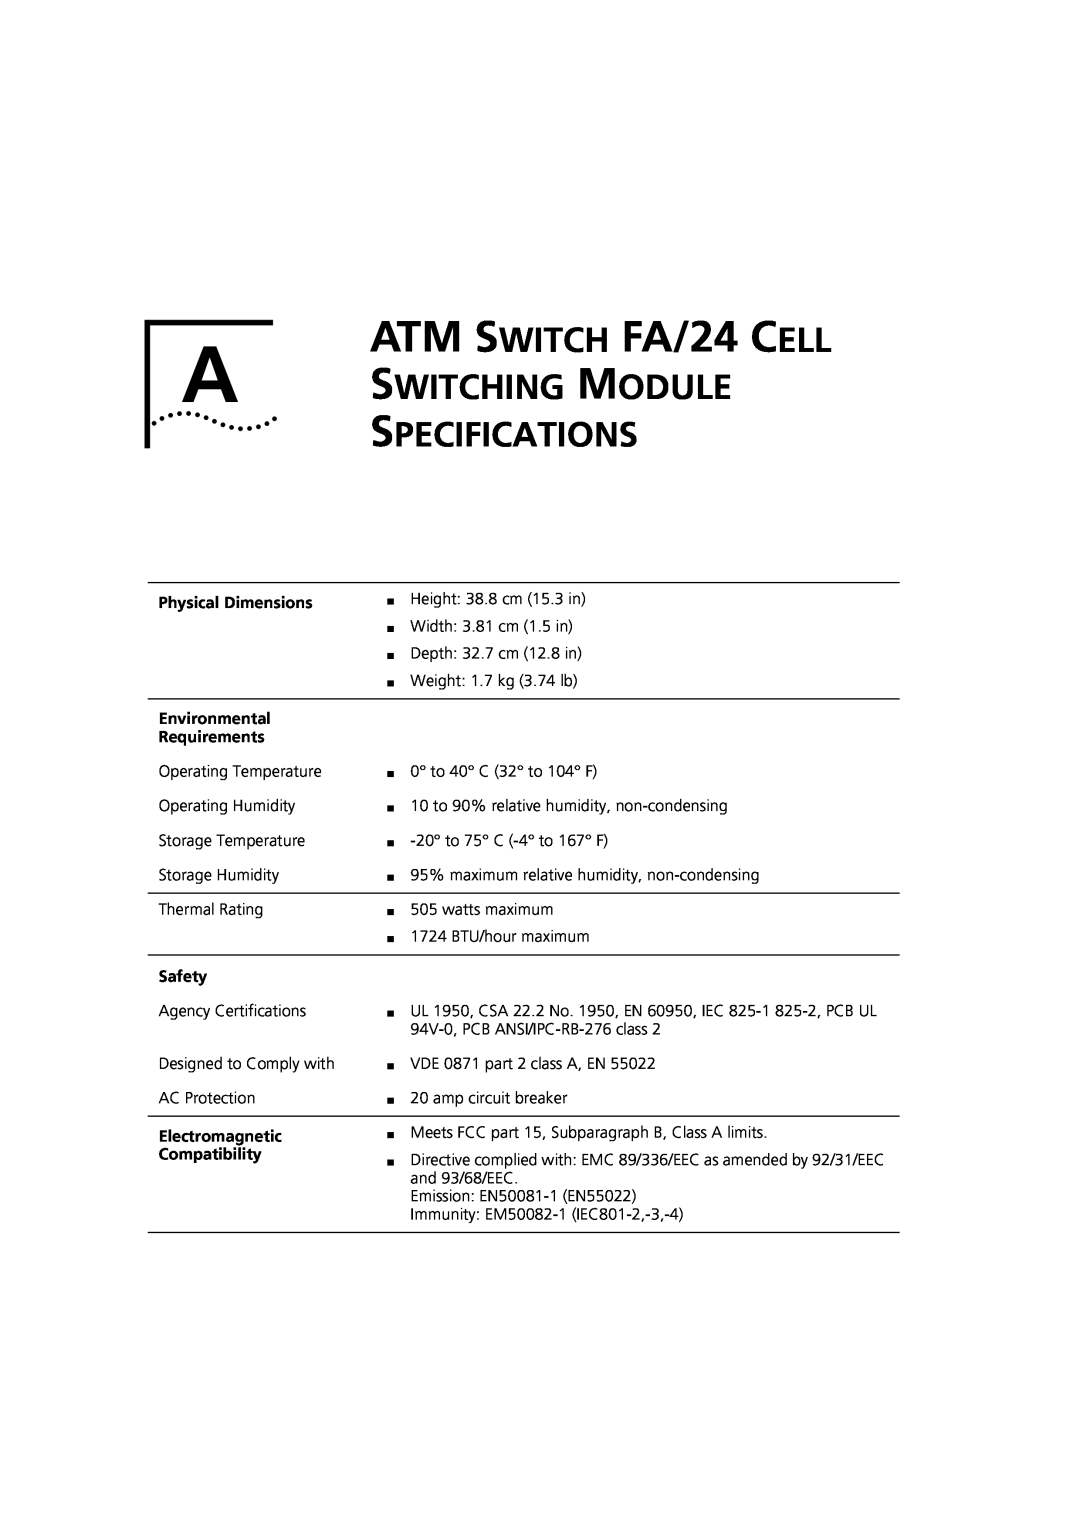 3Com 7000 manual A Switching Module Specifications, ATM SWITCH FA/24 CELL 